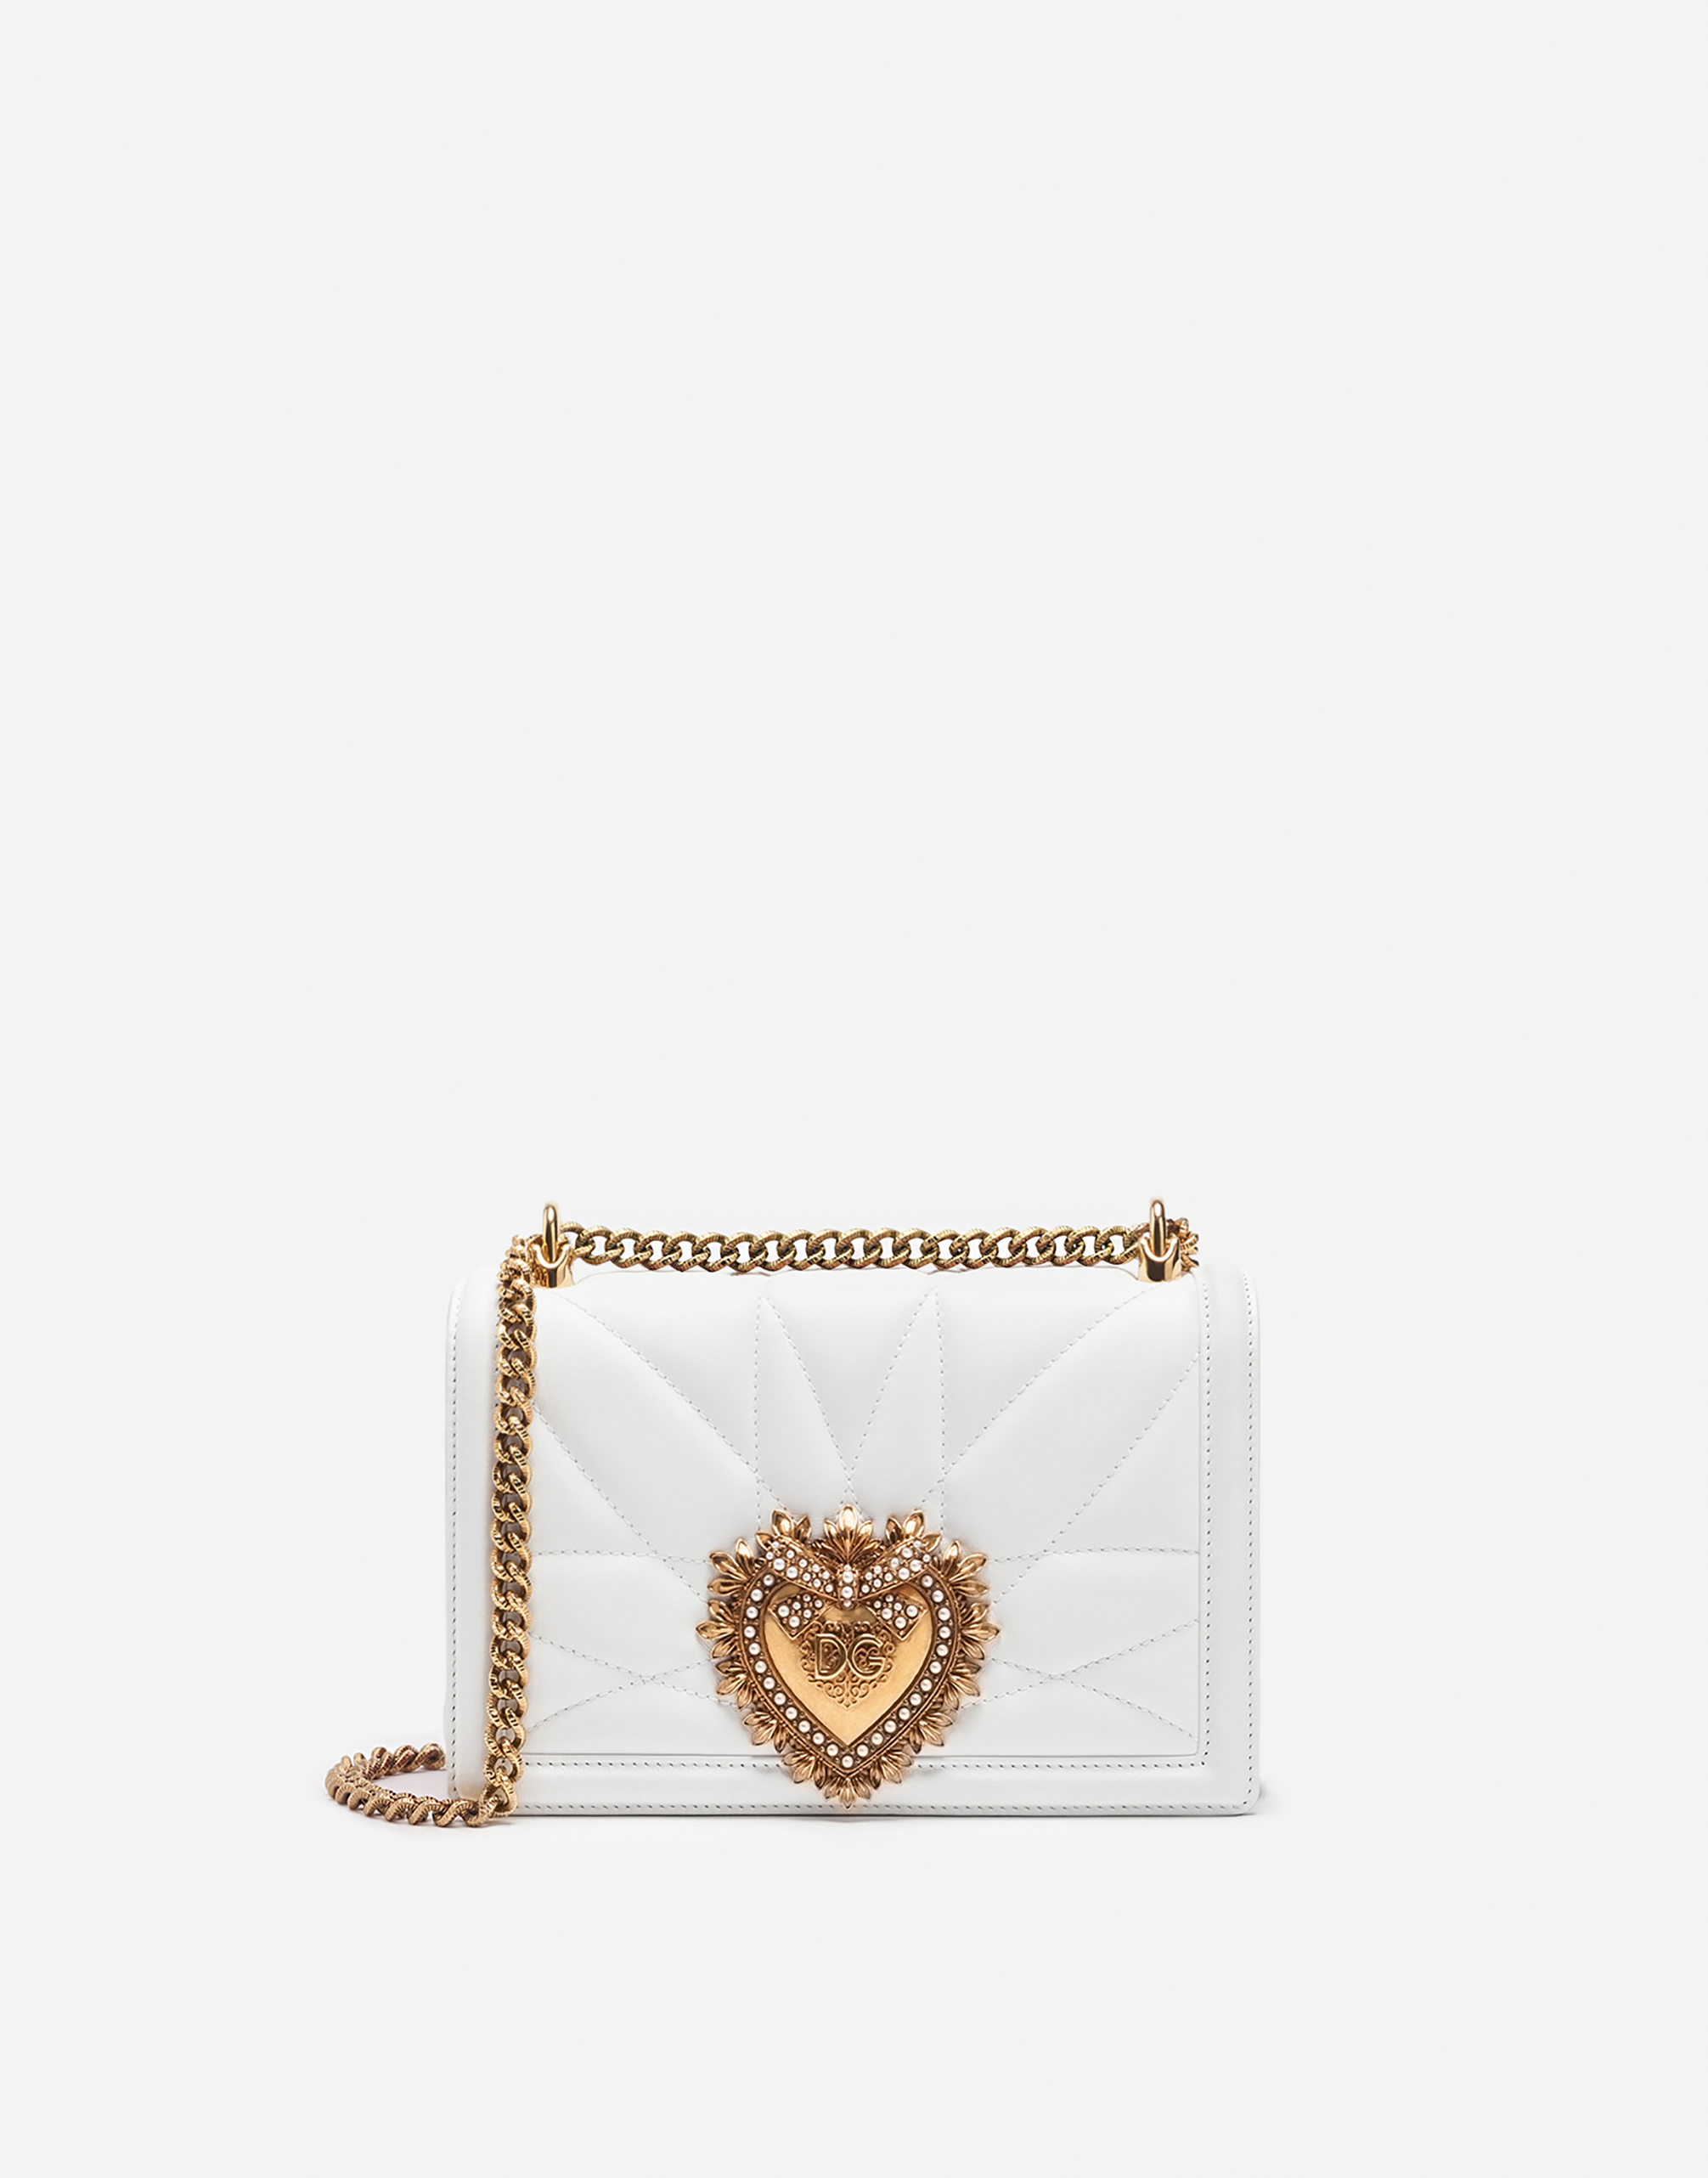 Medium Devotion crossbody bag in quilted nappa leather in Optical White